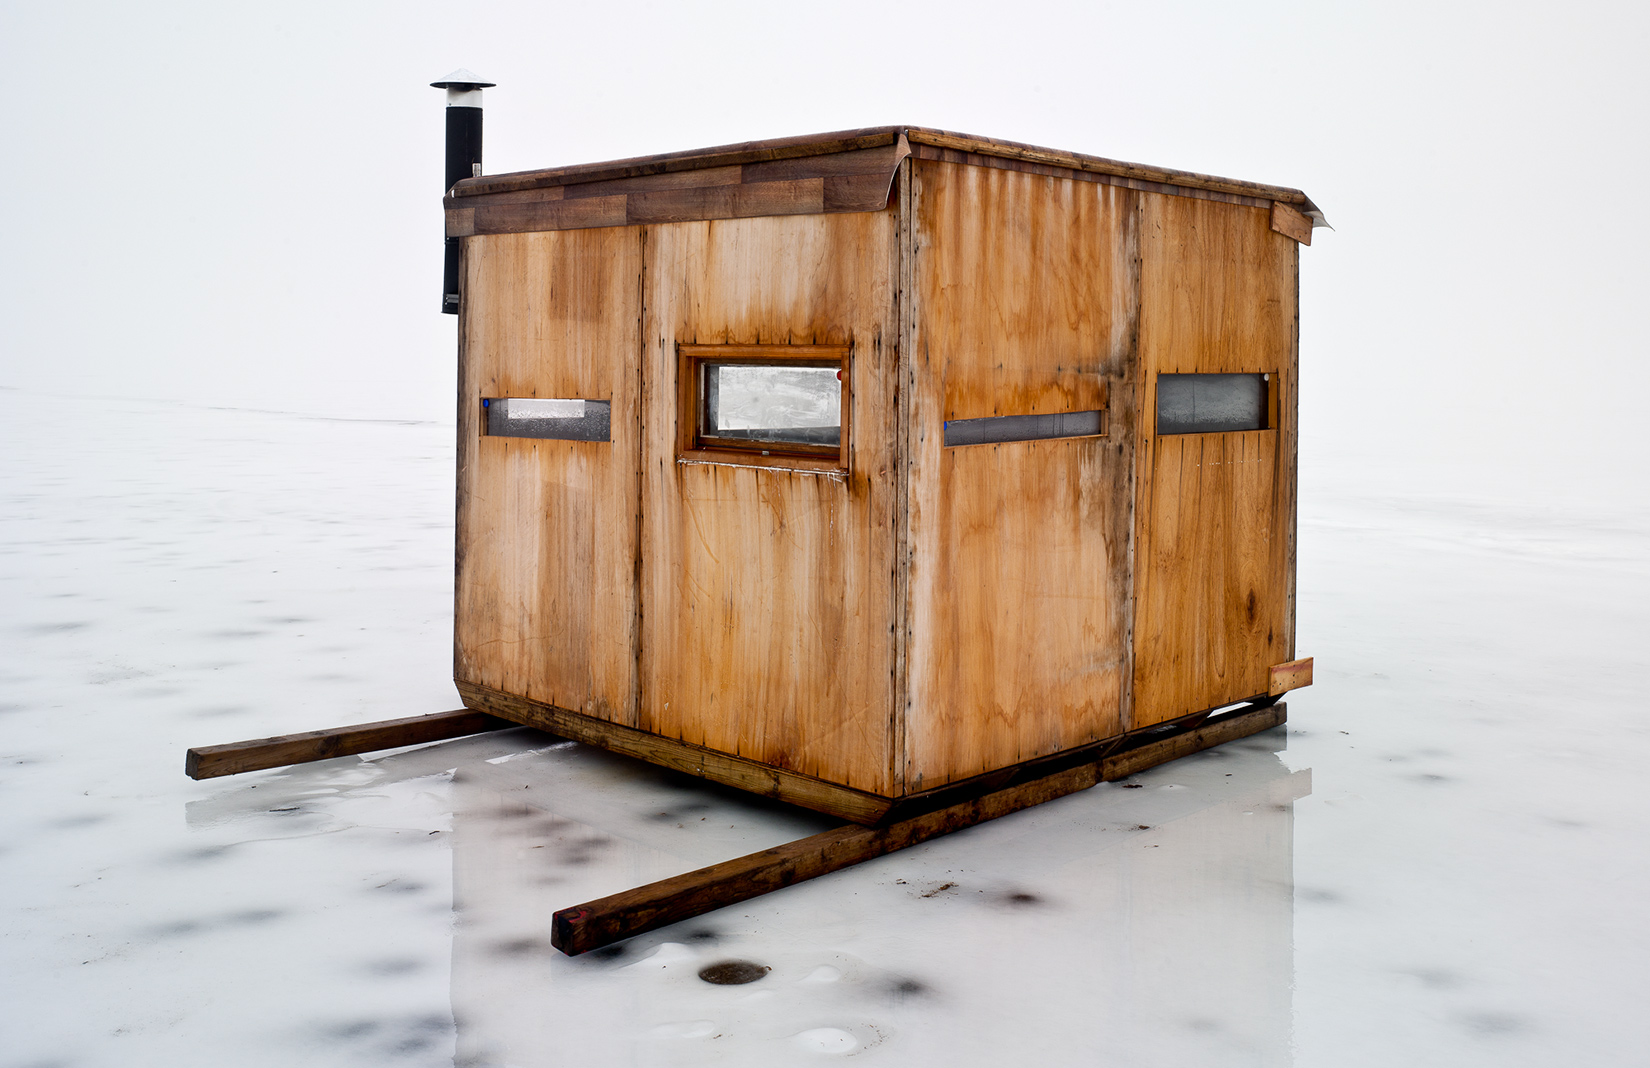 Mike Rebholz photographs the ice-fishing huts of Wisconsin - The